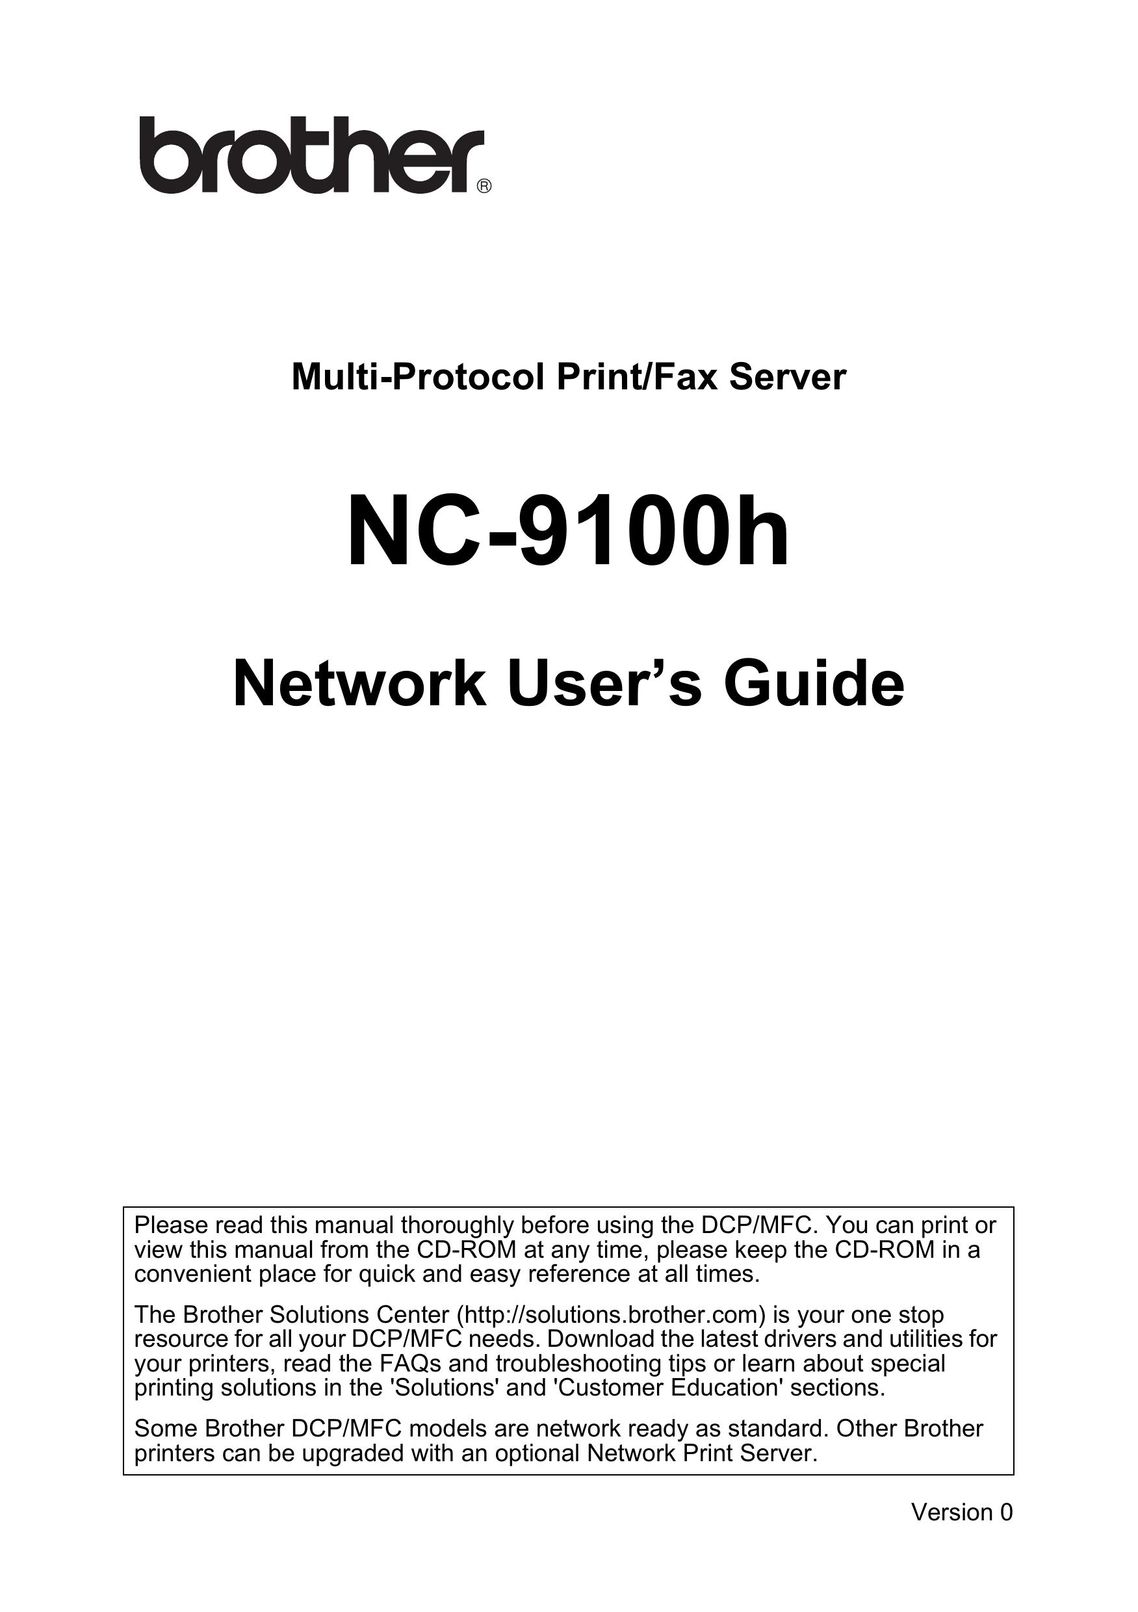 Brother NC-9100h Home Theater Server User Manual